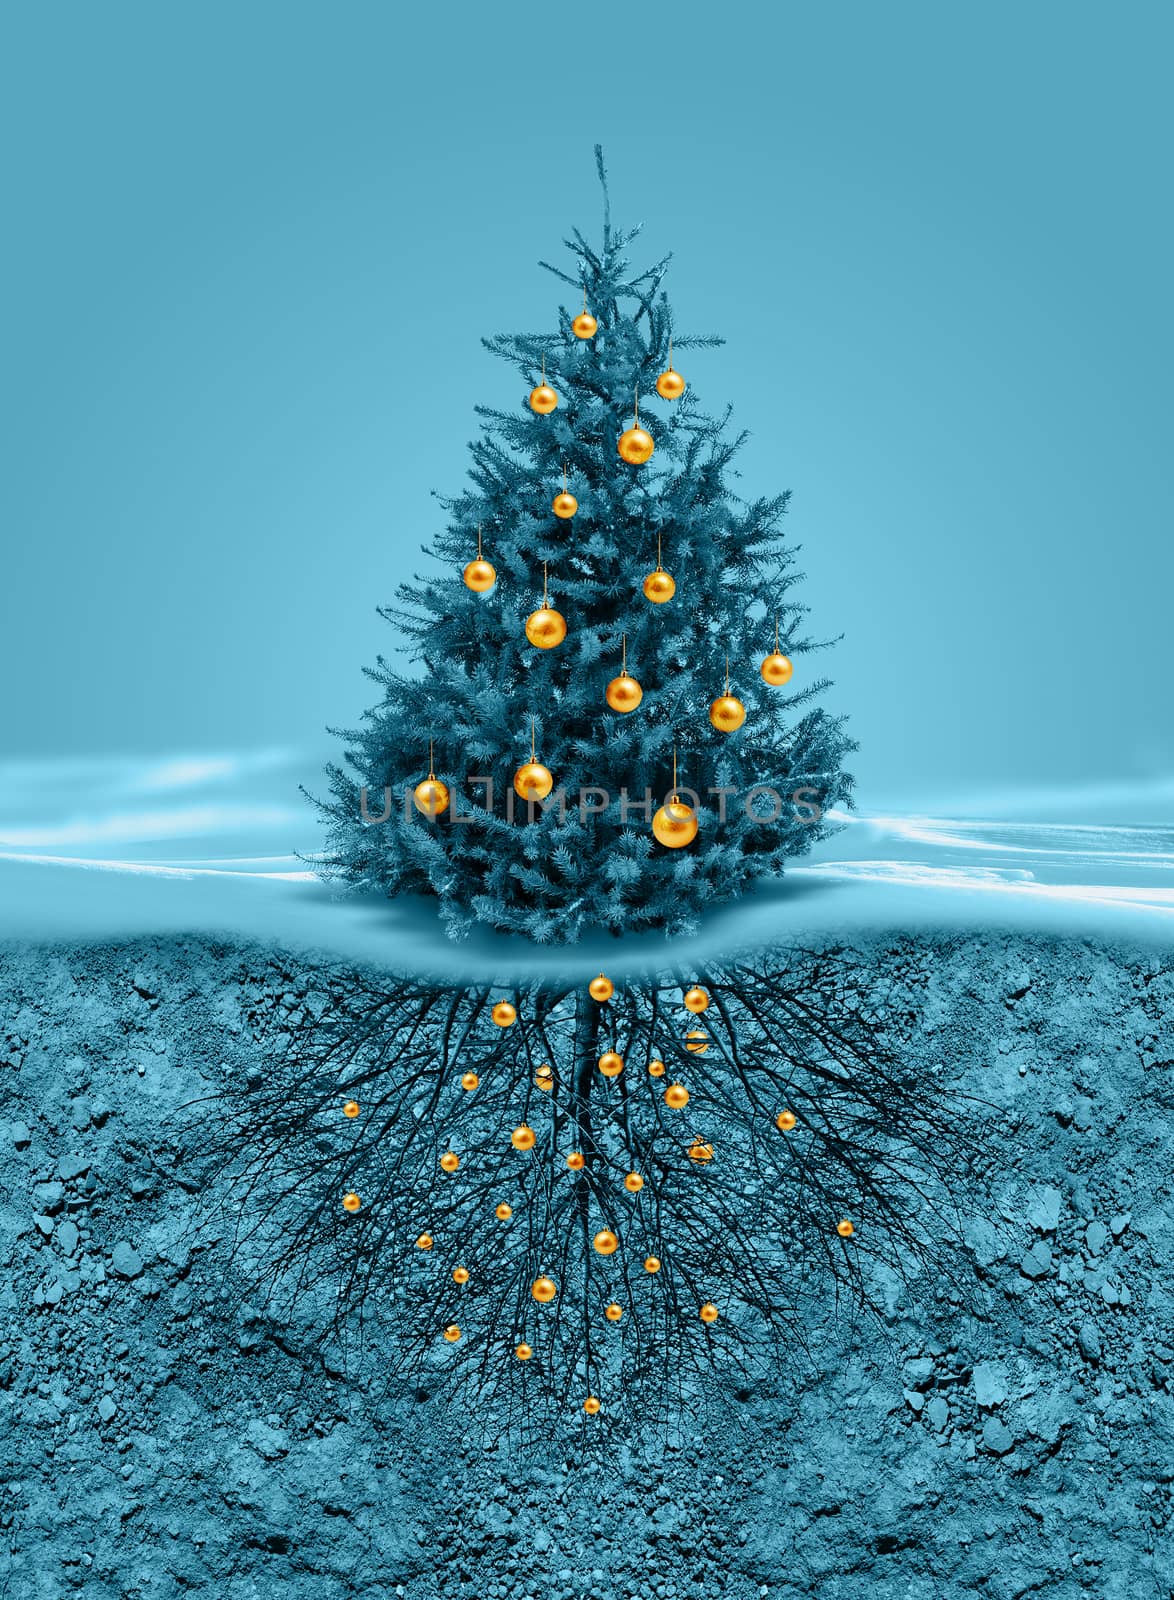 Christmas tree with golden balls, roots in soil beneath